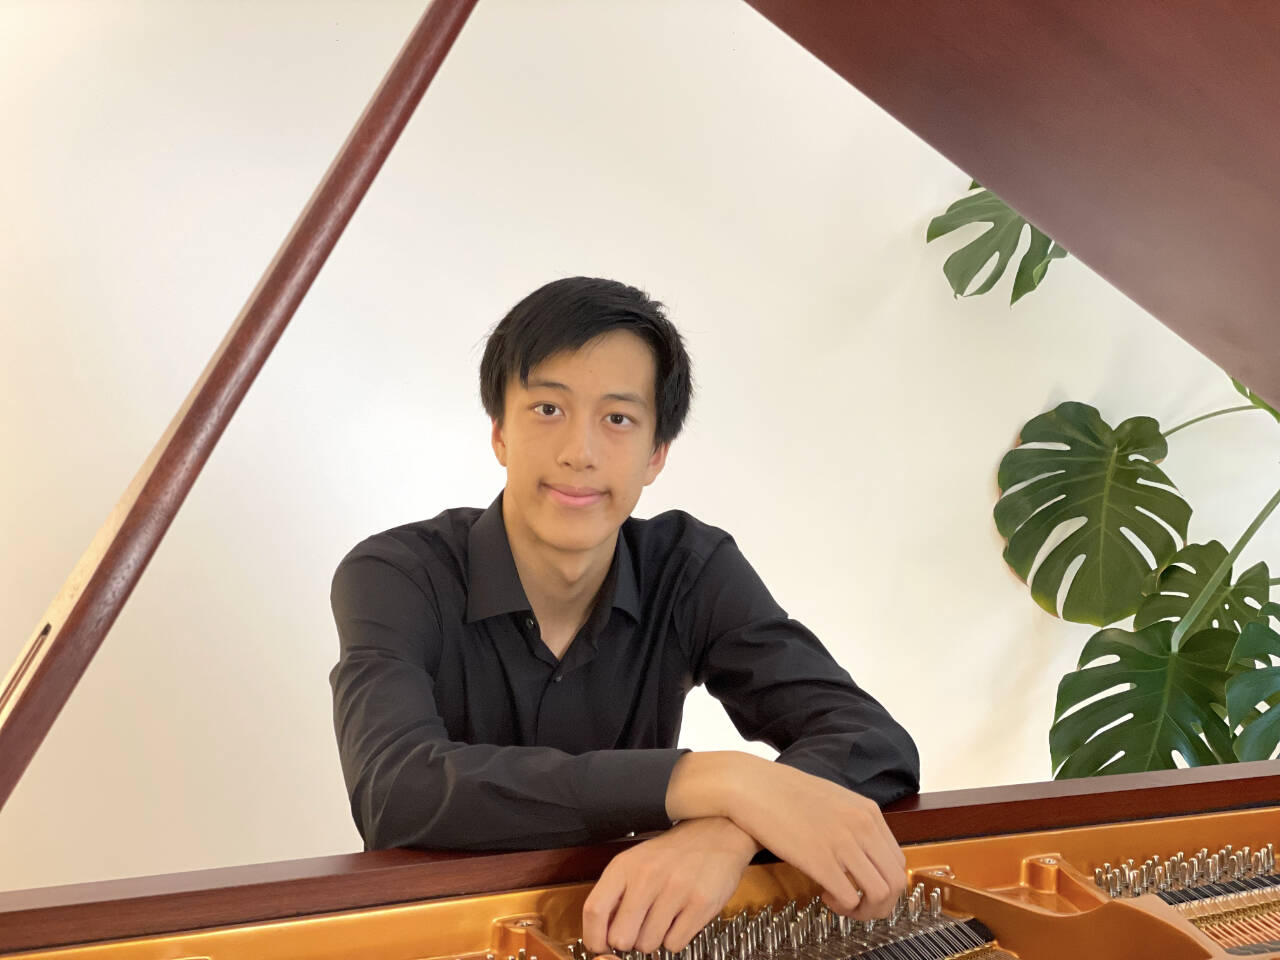 Leo Yang, a national award-winning youth pianist, will take the stage for a concert at the Field Arts Events Hall in Port Angeles on April 13. (Leo Yang)